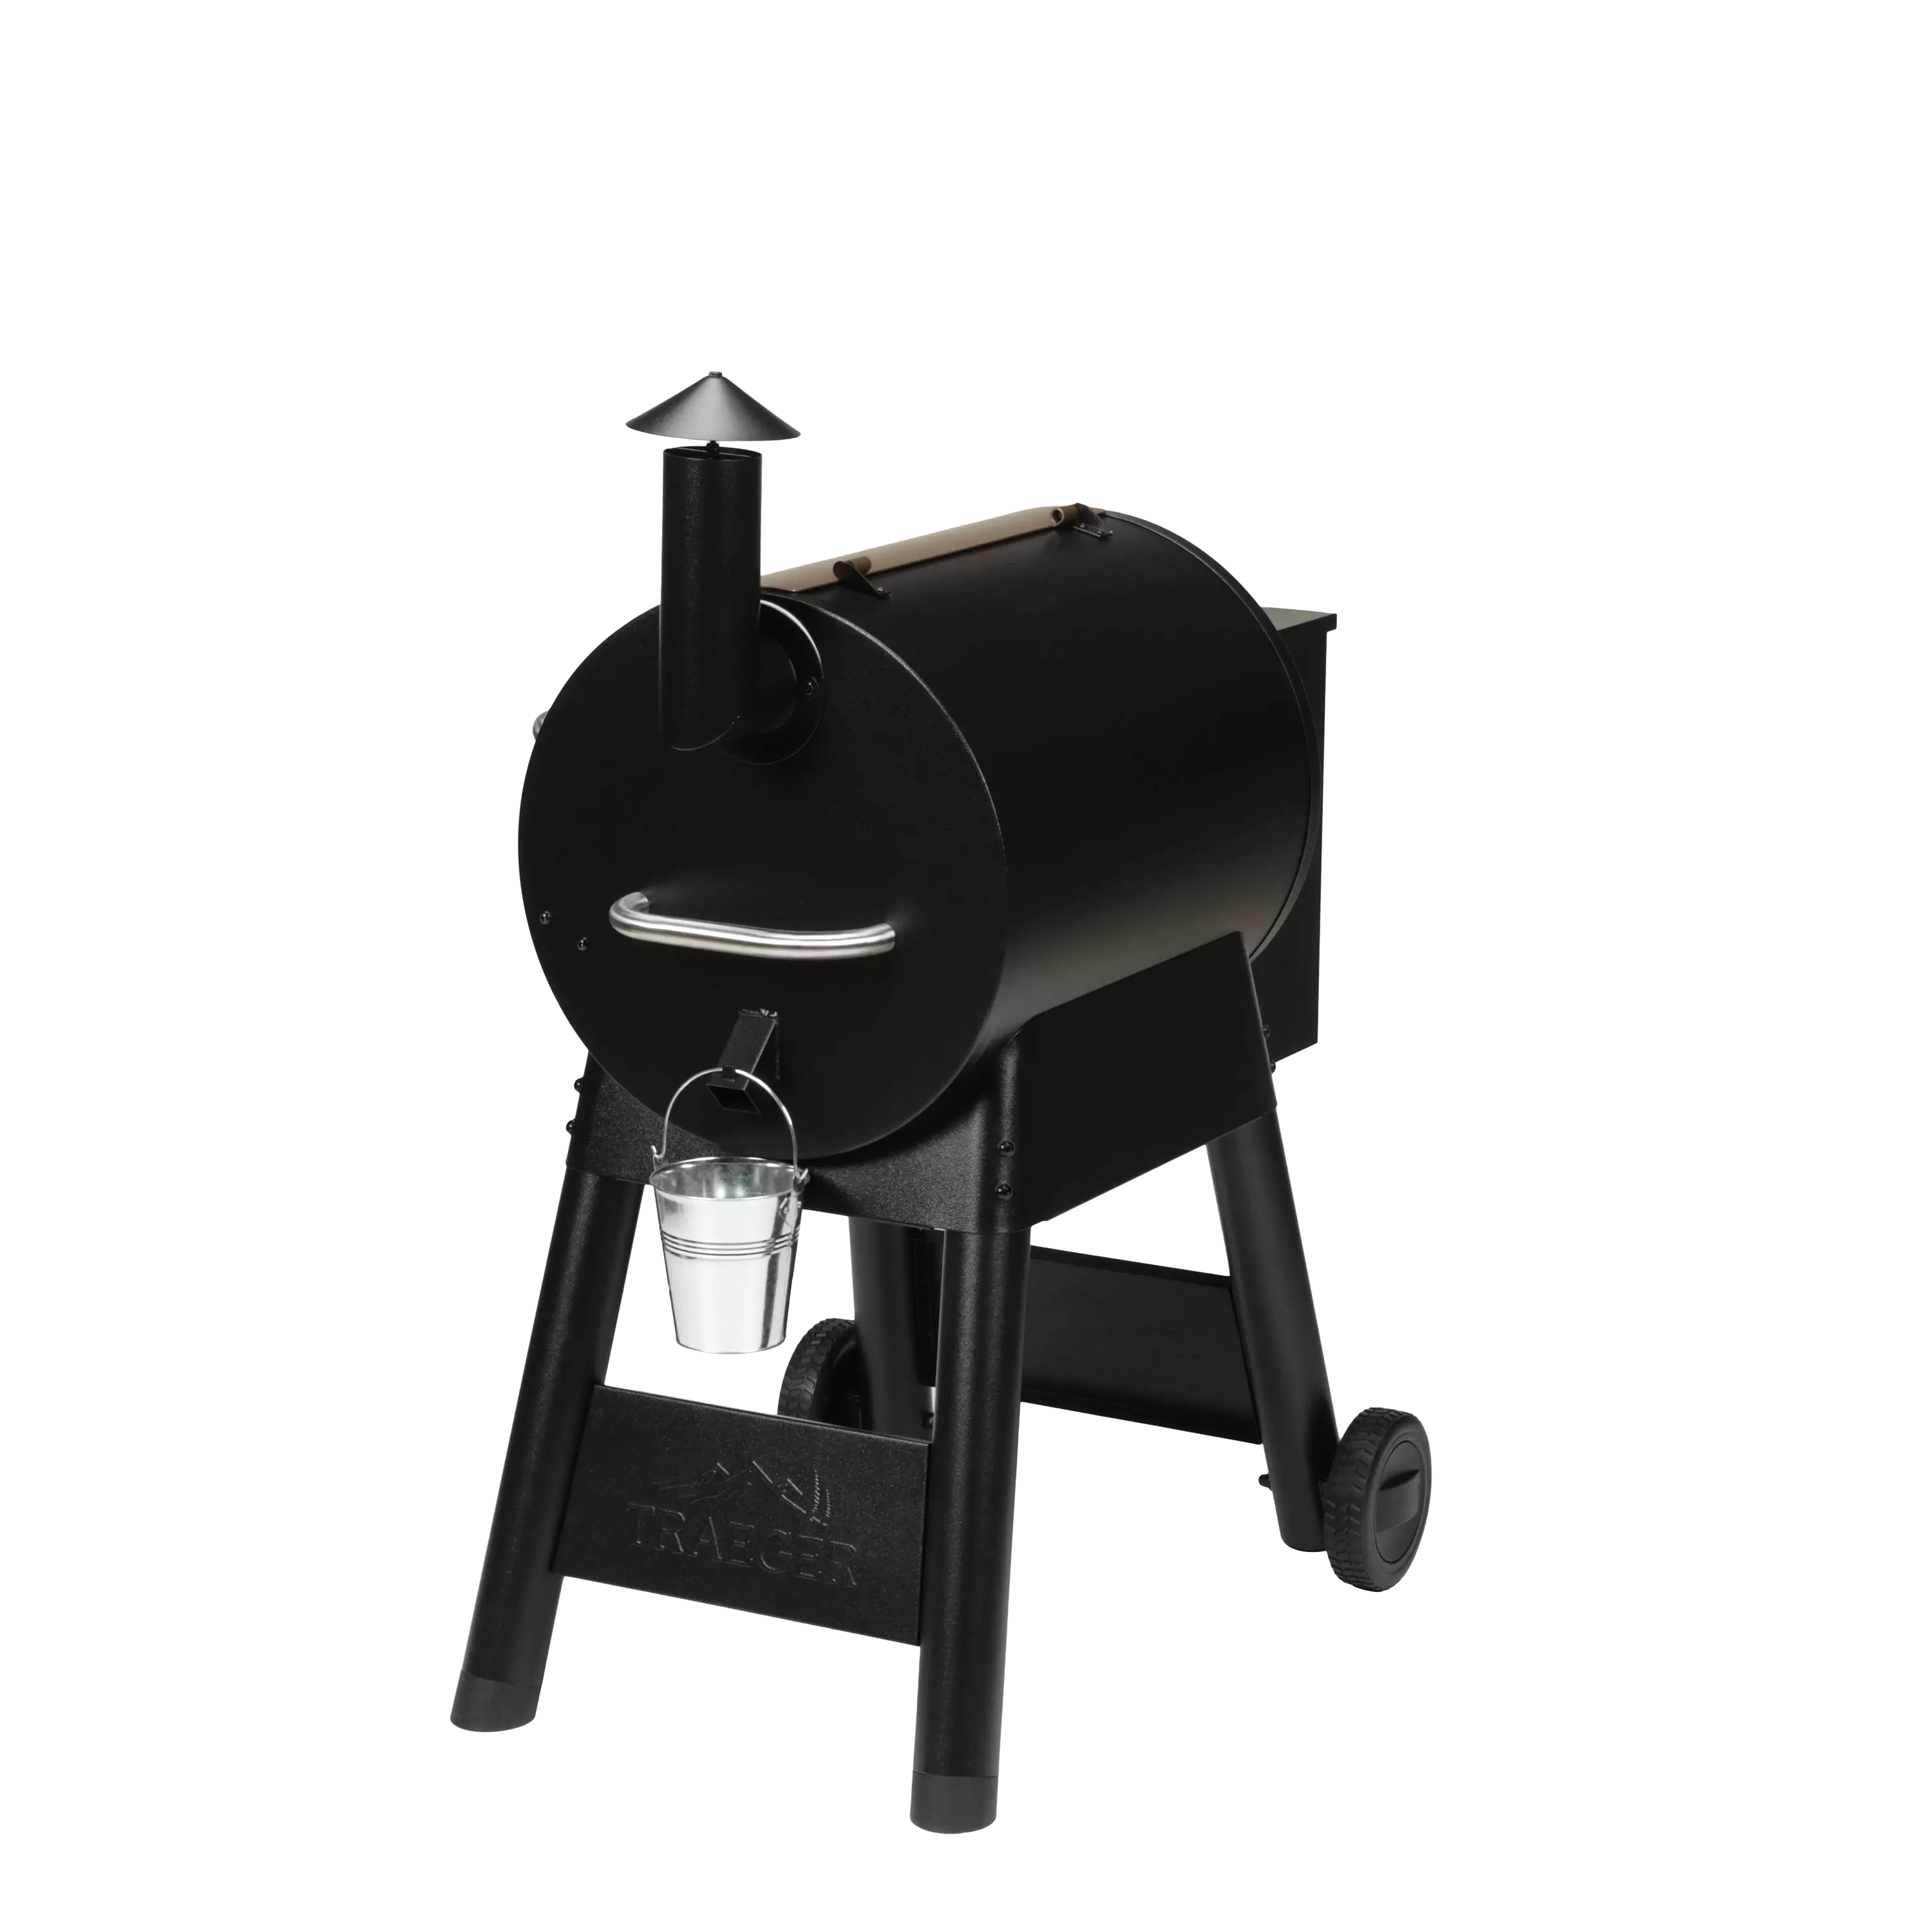 Traeger Grills Pro Series 22 Electric Wood Pellet Grill and Smoker, Bronze,  Extra large